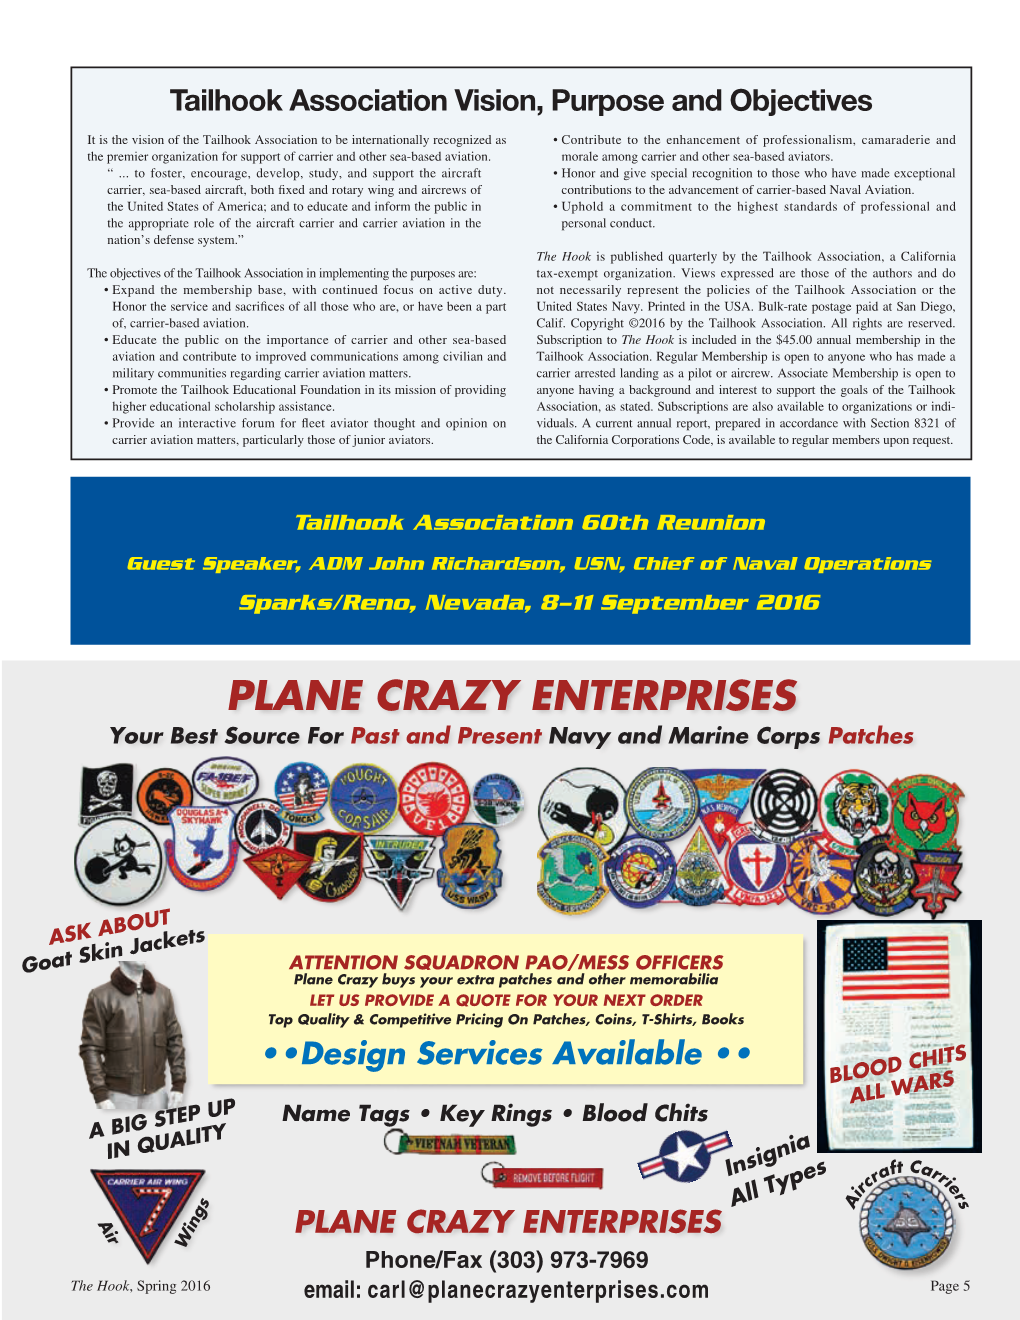 PLANE CRAZY ENTERPRISES Your Best Source for Past and Present Navy and Marine Corps Patches